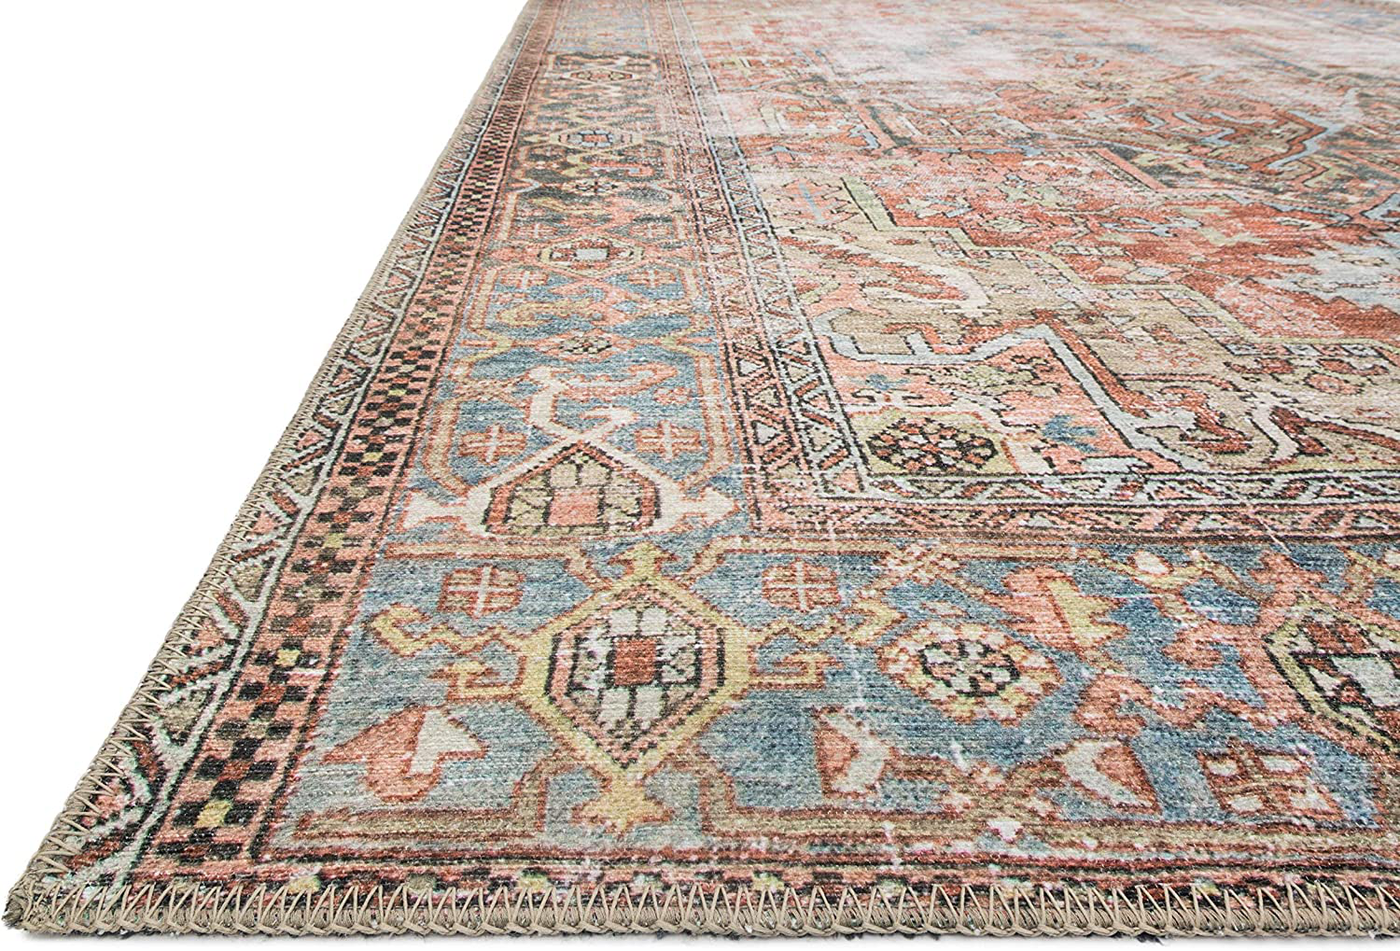 Loloi II Loren Collection Vintage Printed Persian Area Rug 1'-6" x 1'-6" Square Swatch Sand/Taupe